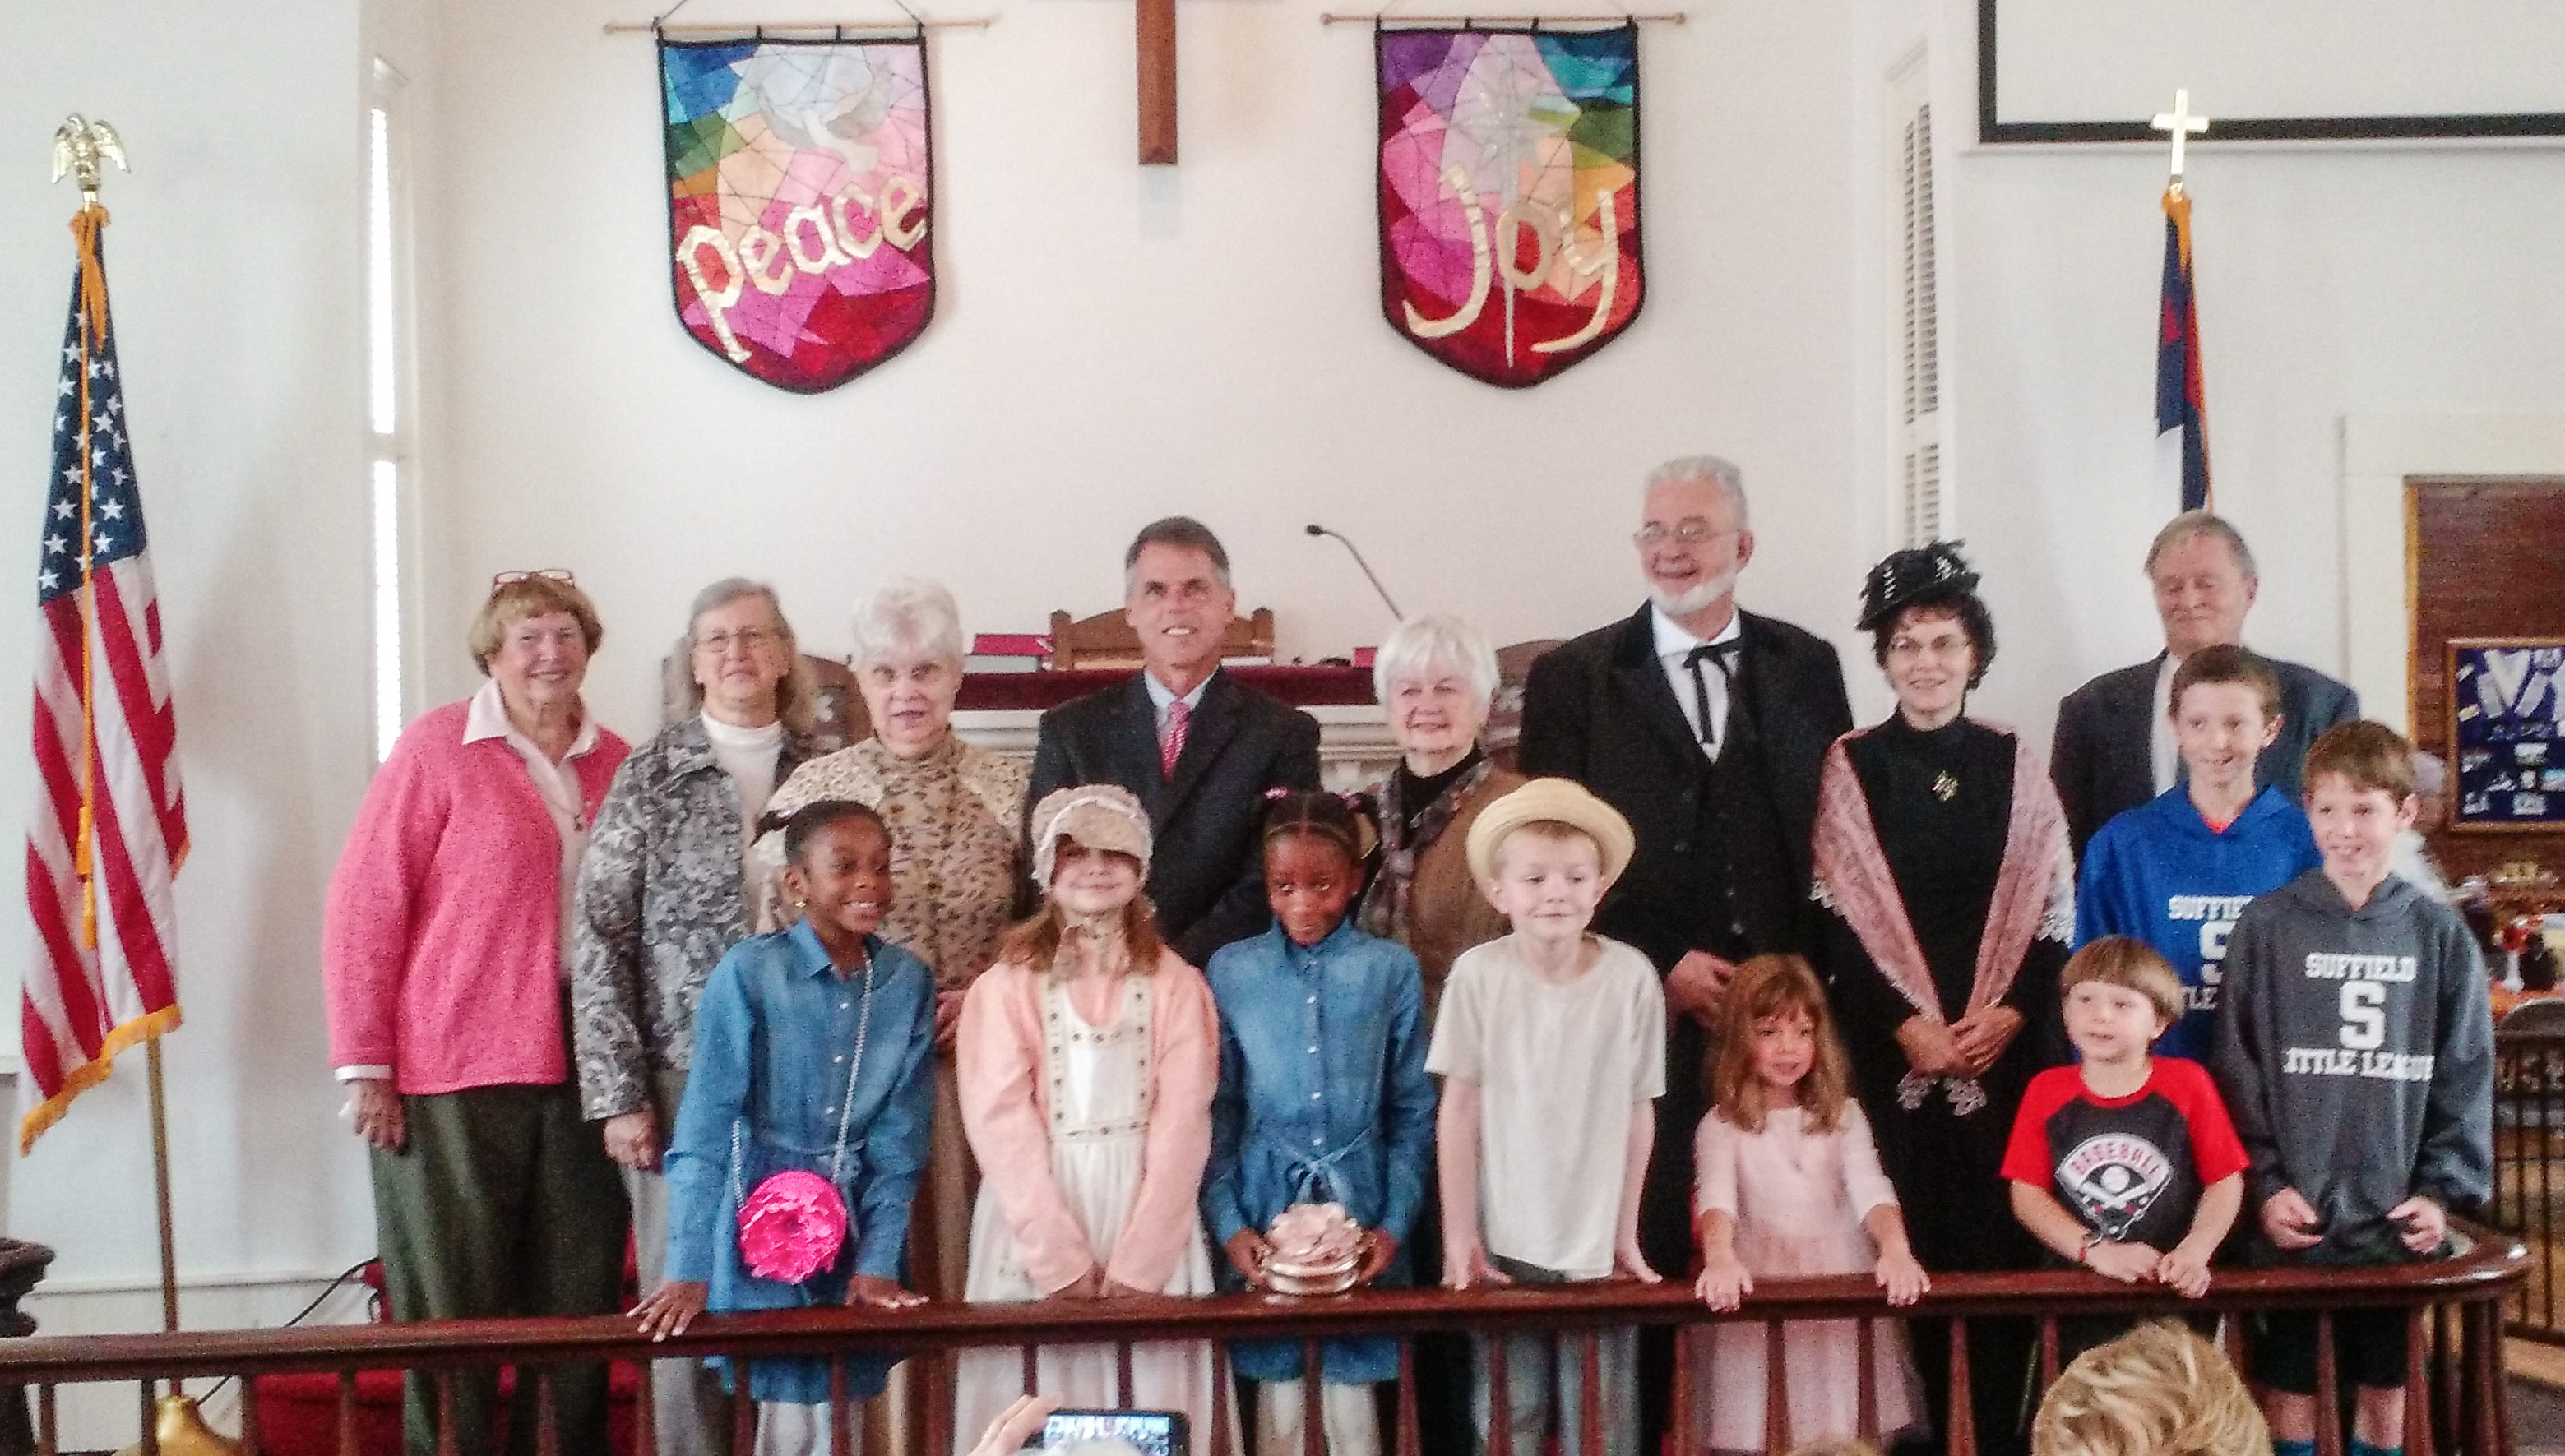 Leaders, dignitaries and children at Copper Hill Church on 200th Anniversary Sunday